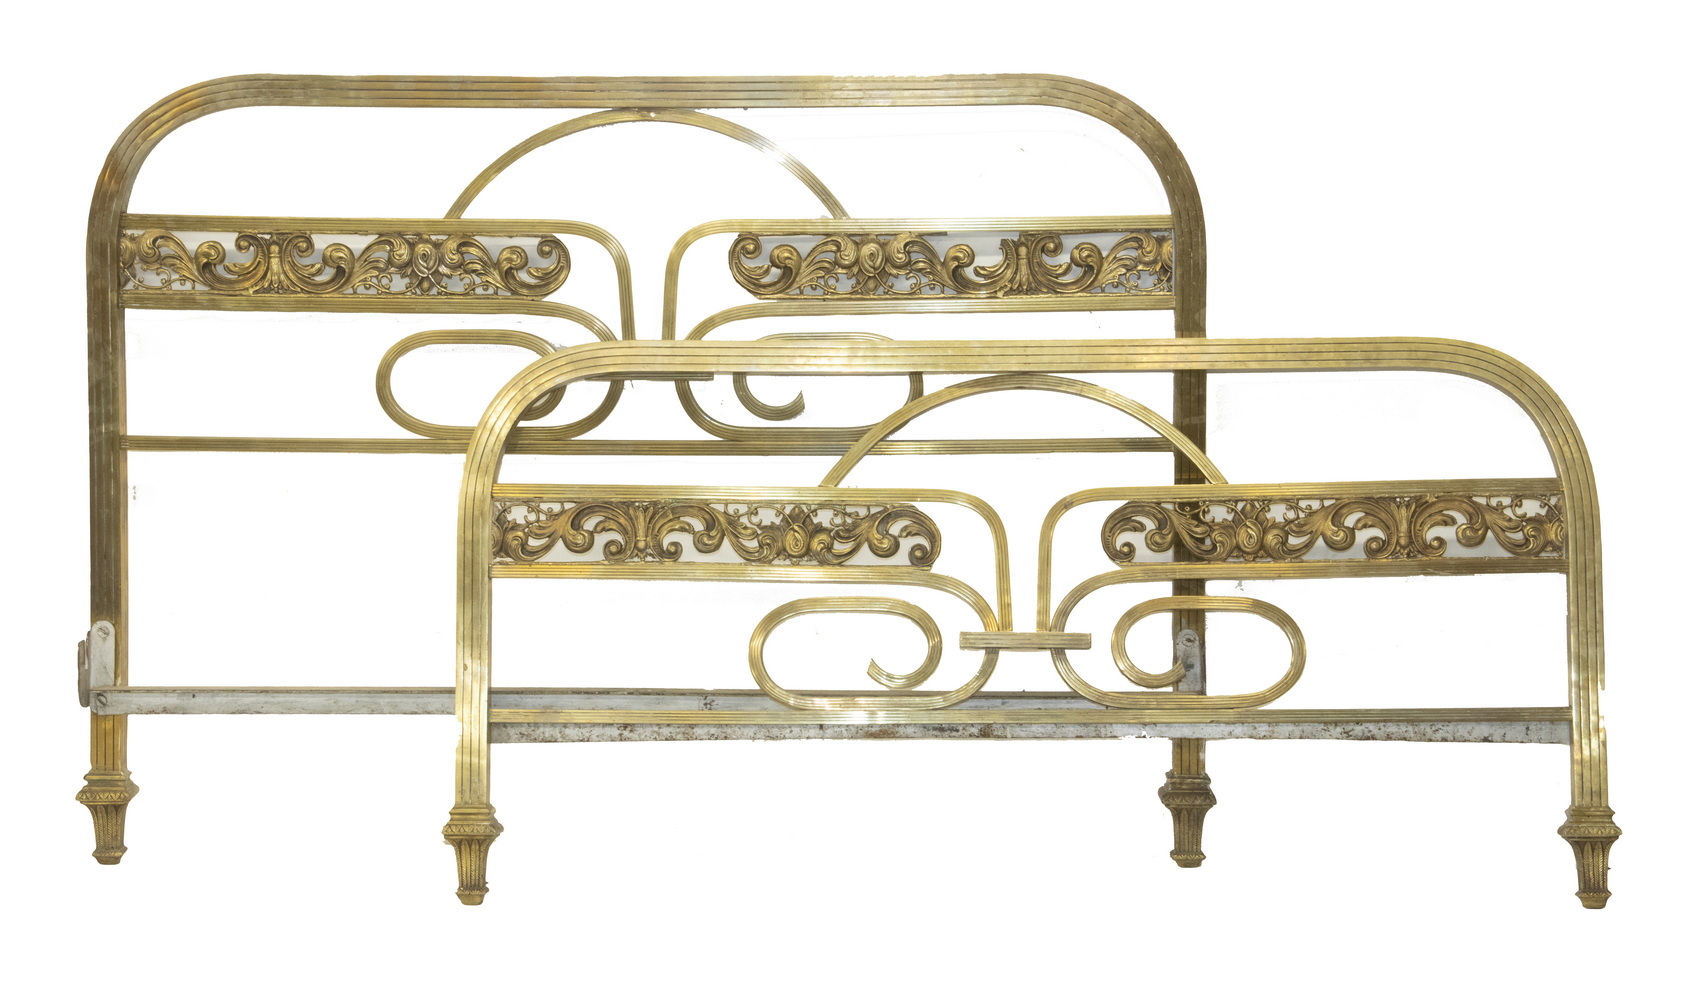 FRENCH FULL SIZE BRASS BED Circa 1900